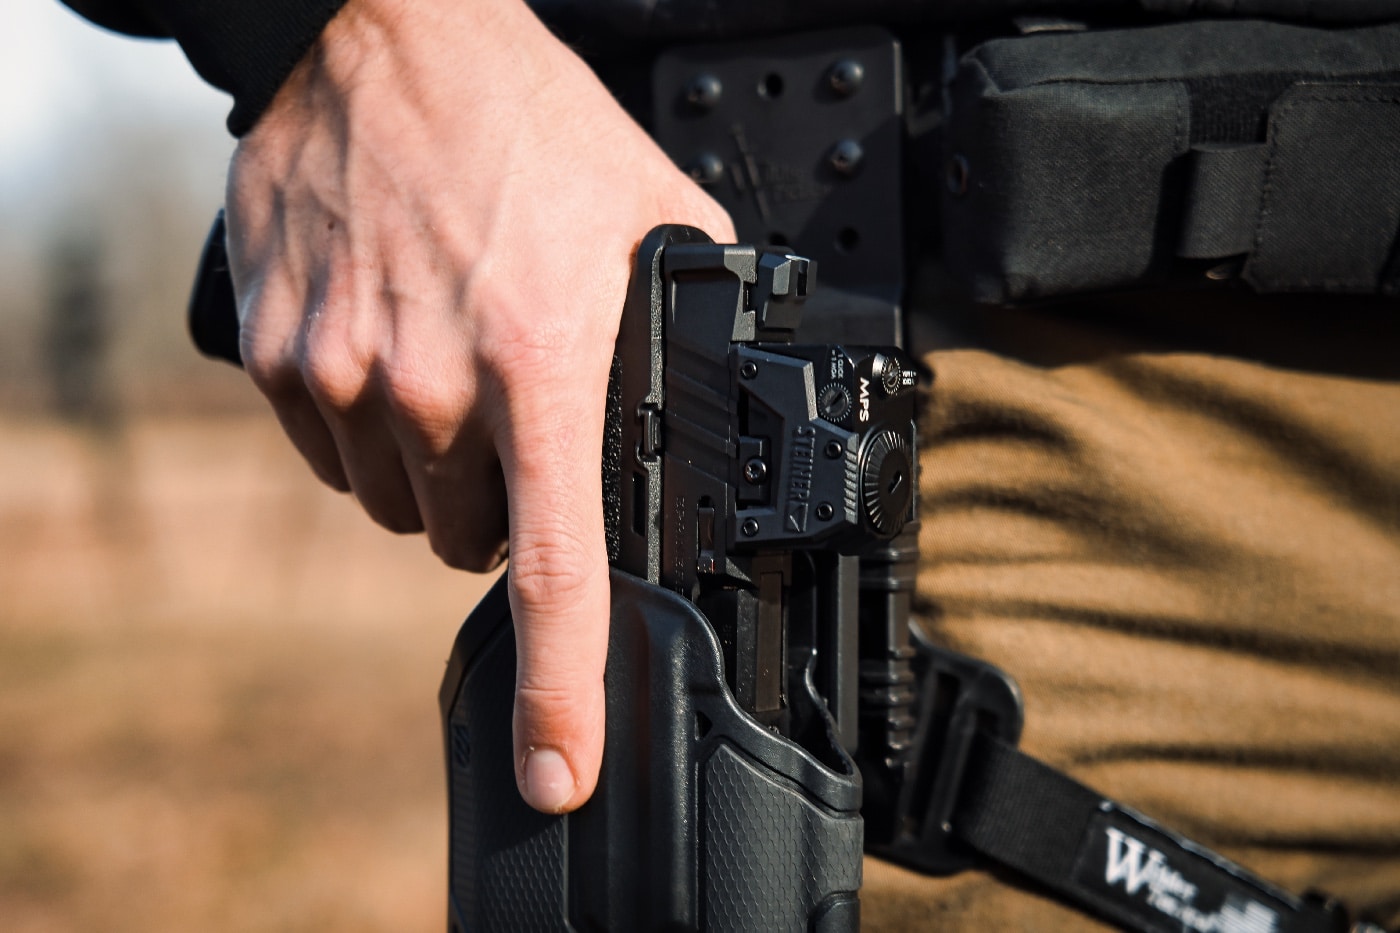 Shown here is the author testing the optic with a Blackhawk holster designed for police and military duty use. You can see the clearance that the rig provides for a red dot sight. The Safariland rig offers a similar fit and clearance. The MPS is powered by a battery that is top mounted which is perfect for an optic from the pistol for fast target or sight acquisition. 